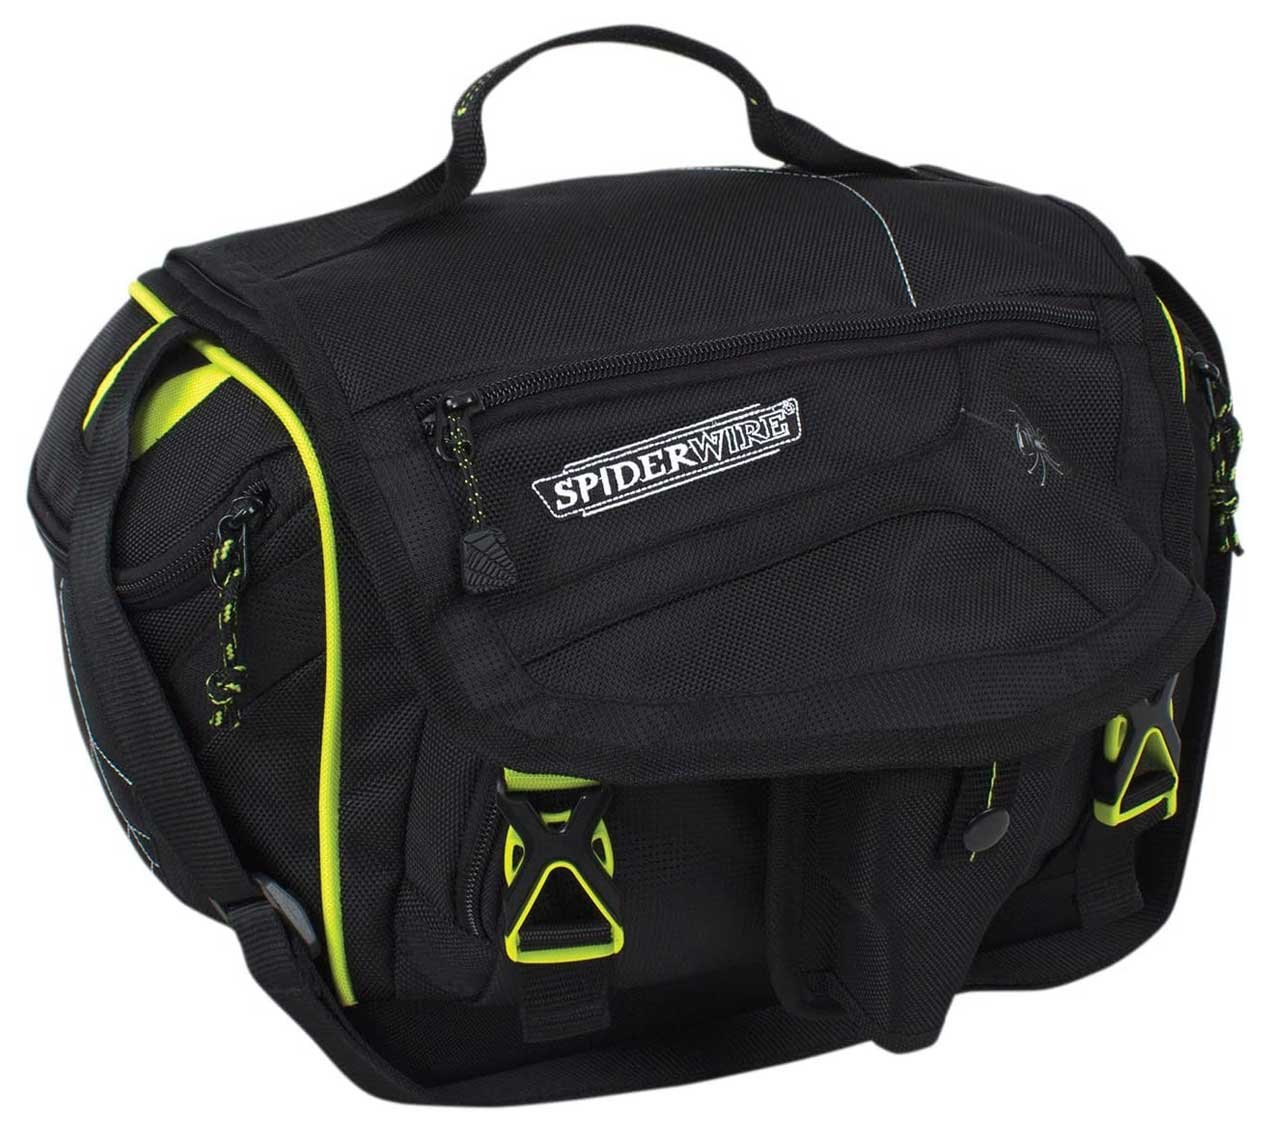 Spiderwire Orb Spider Fishing Tackle Bag